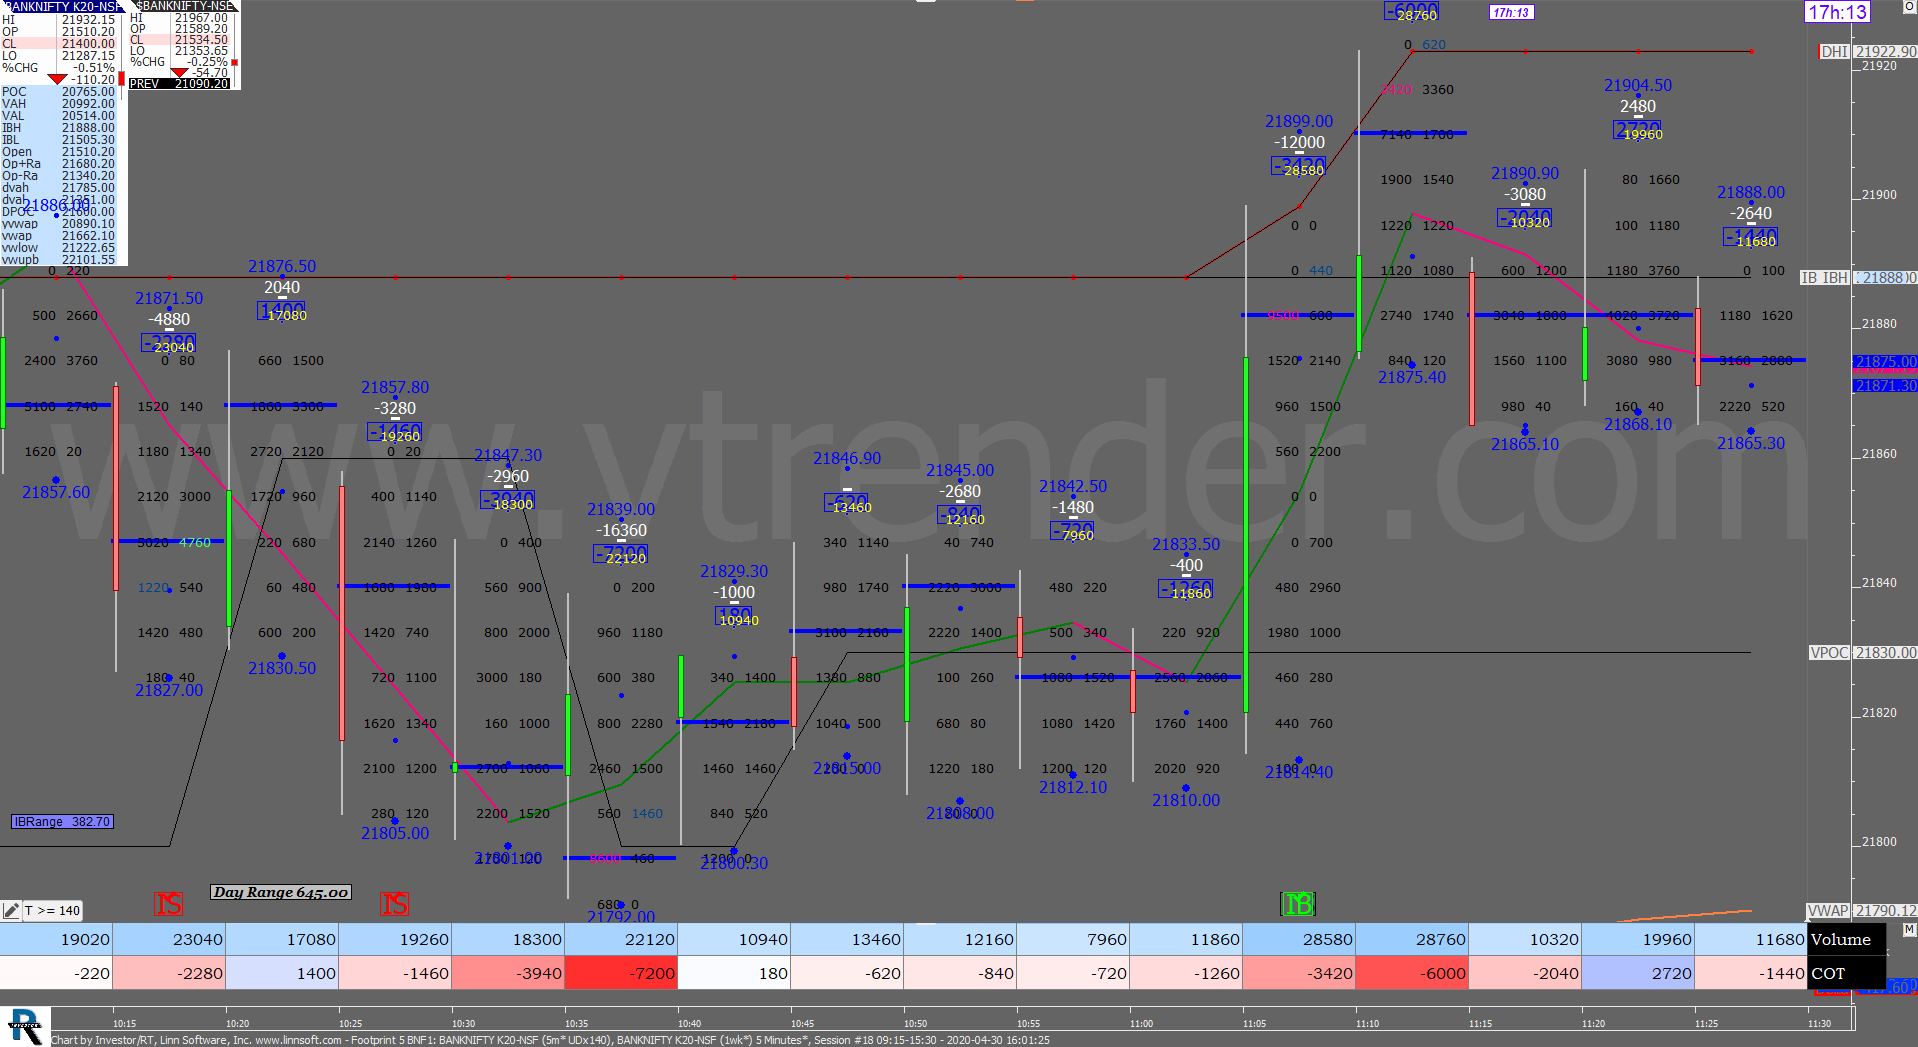 2 35 Order Flow Charts Dated 30Th Apr 2020 (5 Mins) Banknifty Futures, Day Trading, Intraday Trading, Intraday Trading Strategies, Nifty Futures, Order Flow Analysis, Support And Resistance, Trading Strategies, Volume Profile Trading